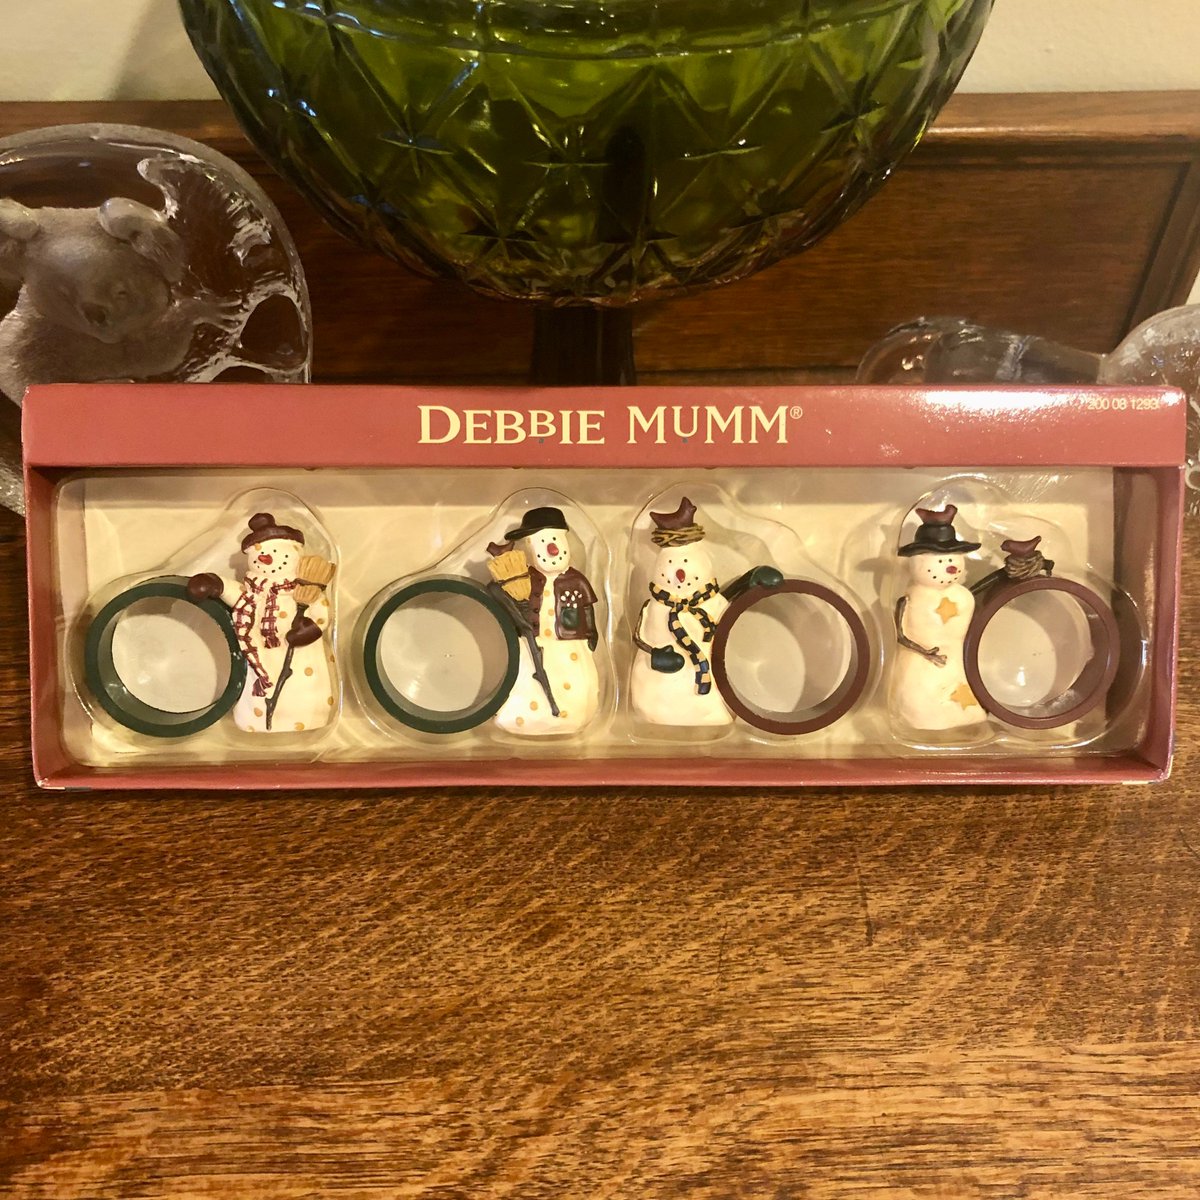 Excited to share the latest addition to my #etsy shop: Debbie Mumm Napkin Rings #Christmas Sledding Snowmen #Vintage #Serving #Holiday Decor NOS 2000 etsy.me/3QXBkGb #christmas #countrybarn #napkinrings #vintage #dining #tabledecor #winter